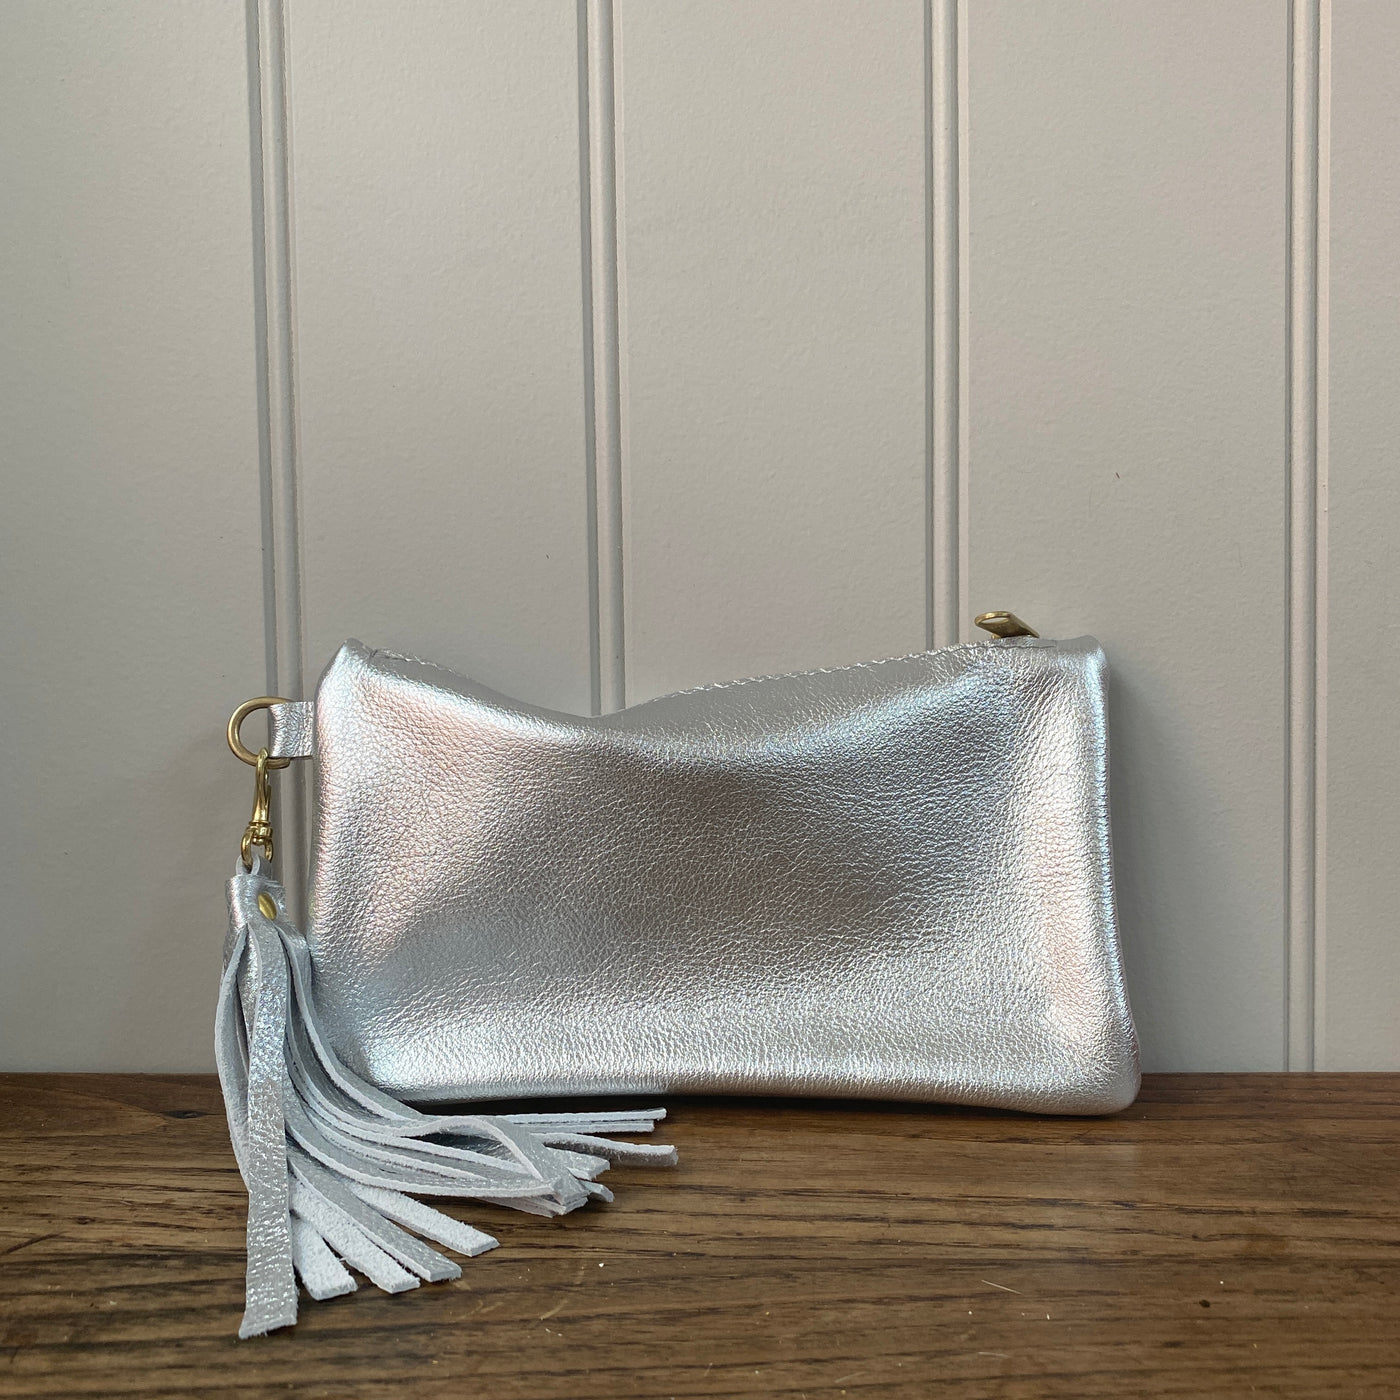 From St Xavier metallic silver clutch | Nuuly Thrift